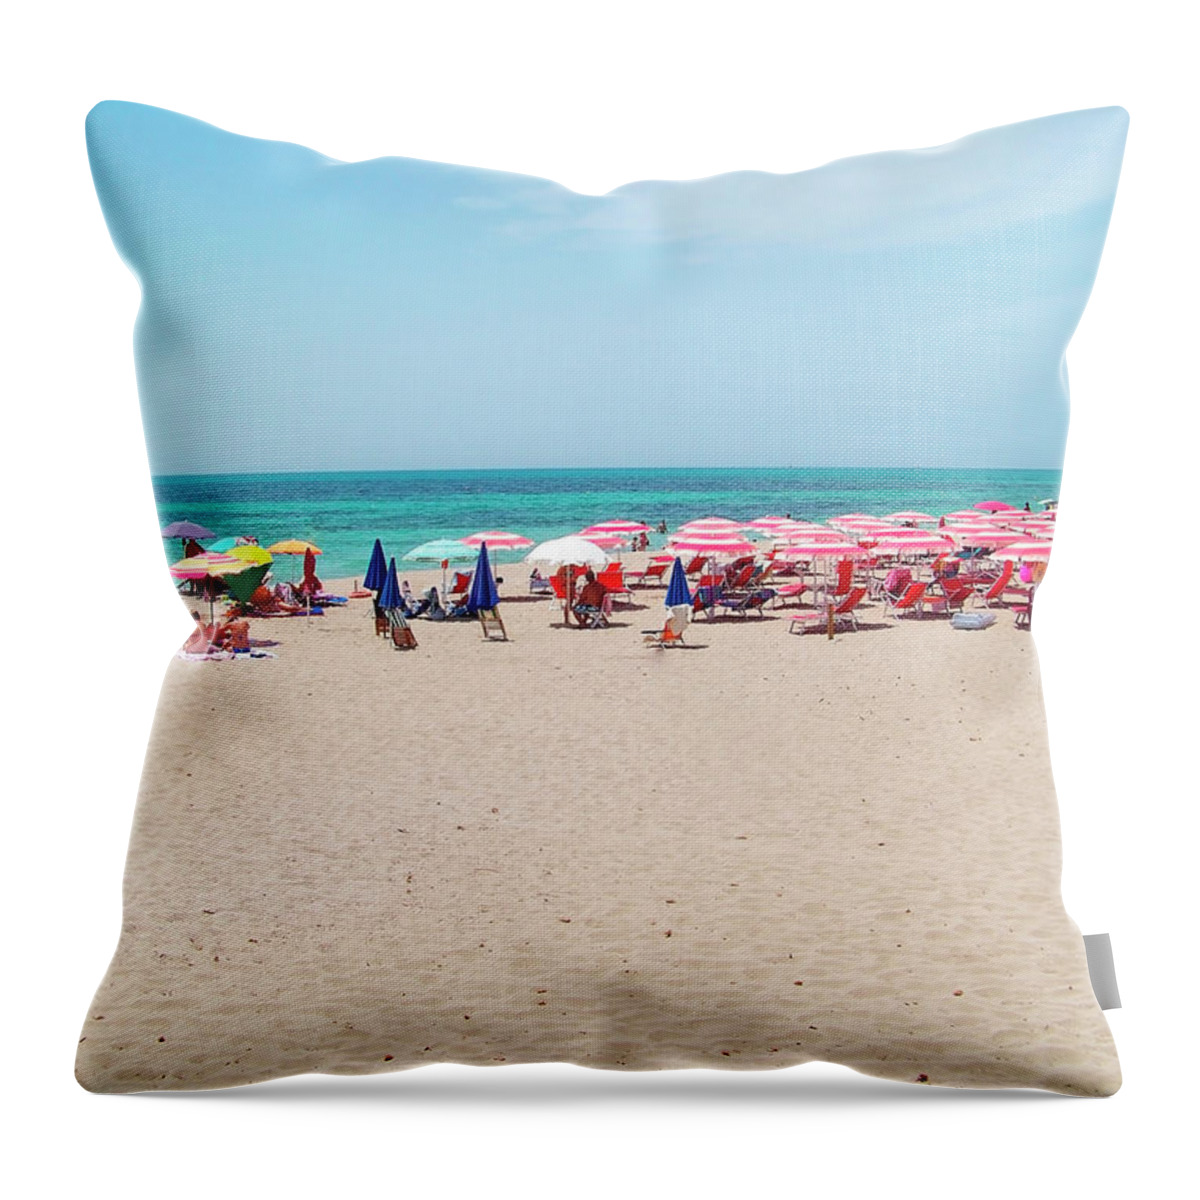 Adriatic Sea Throw Pillow featuring the photograph Beach In Salento by Stefano Salvetti